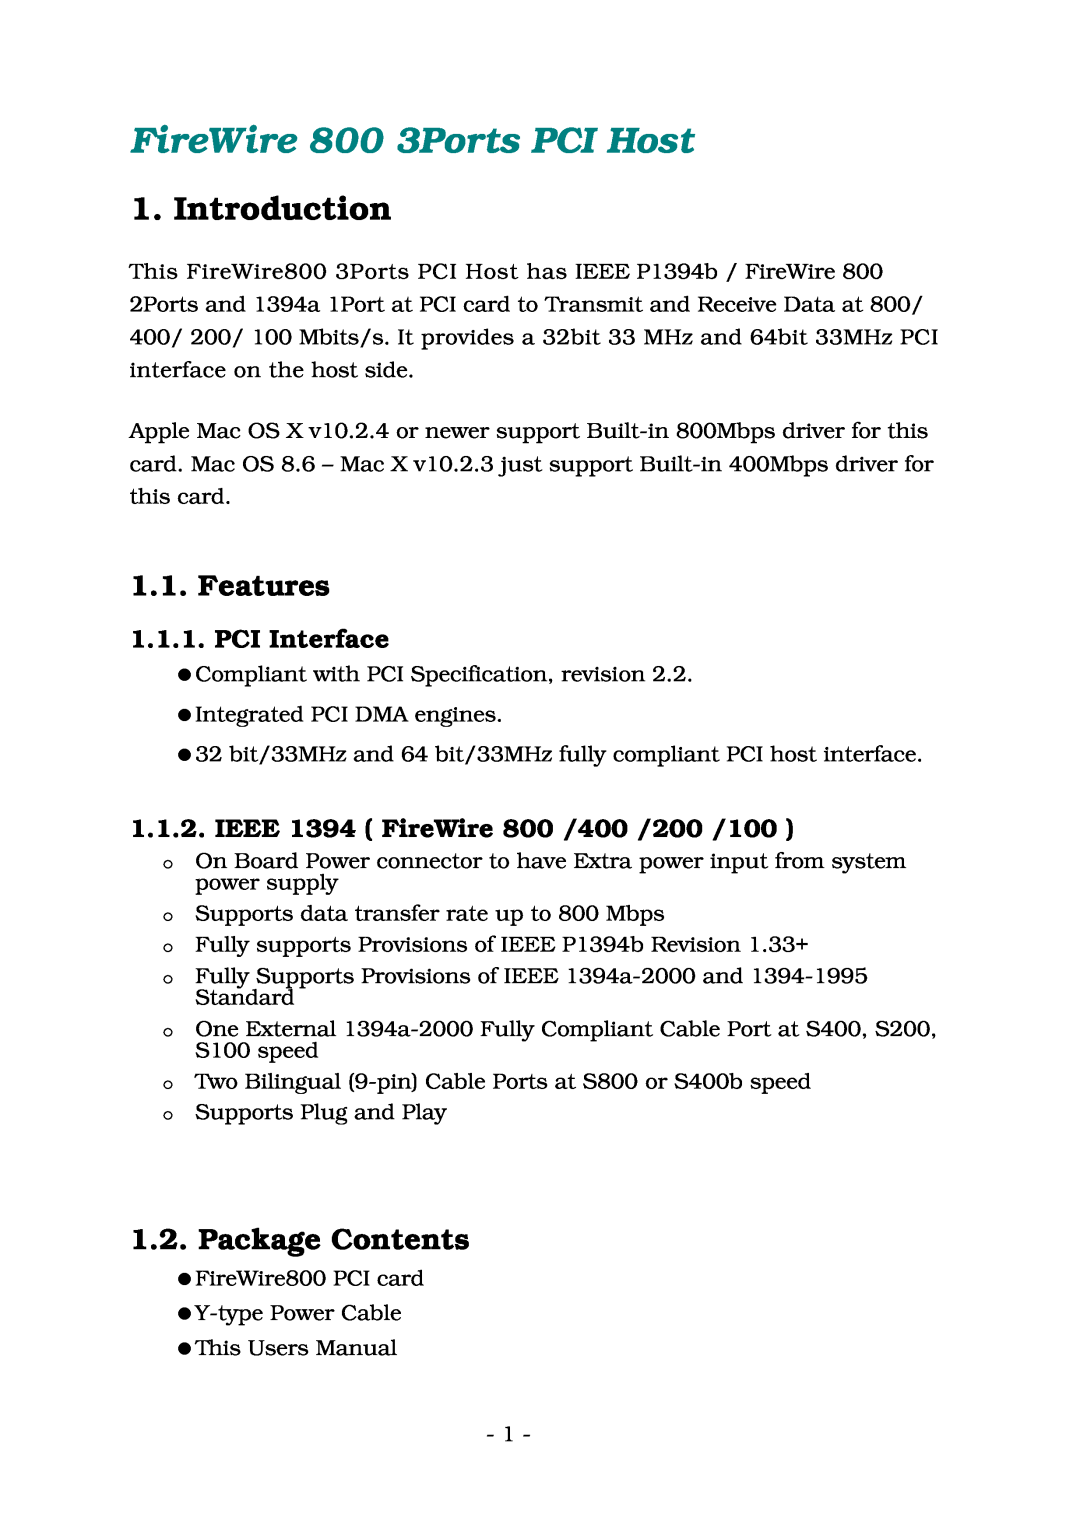 Lindy user manual Introduction, FireWire 800 3Ports PCI Host, Features, Package Contents, PCI Interface 